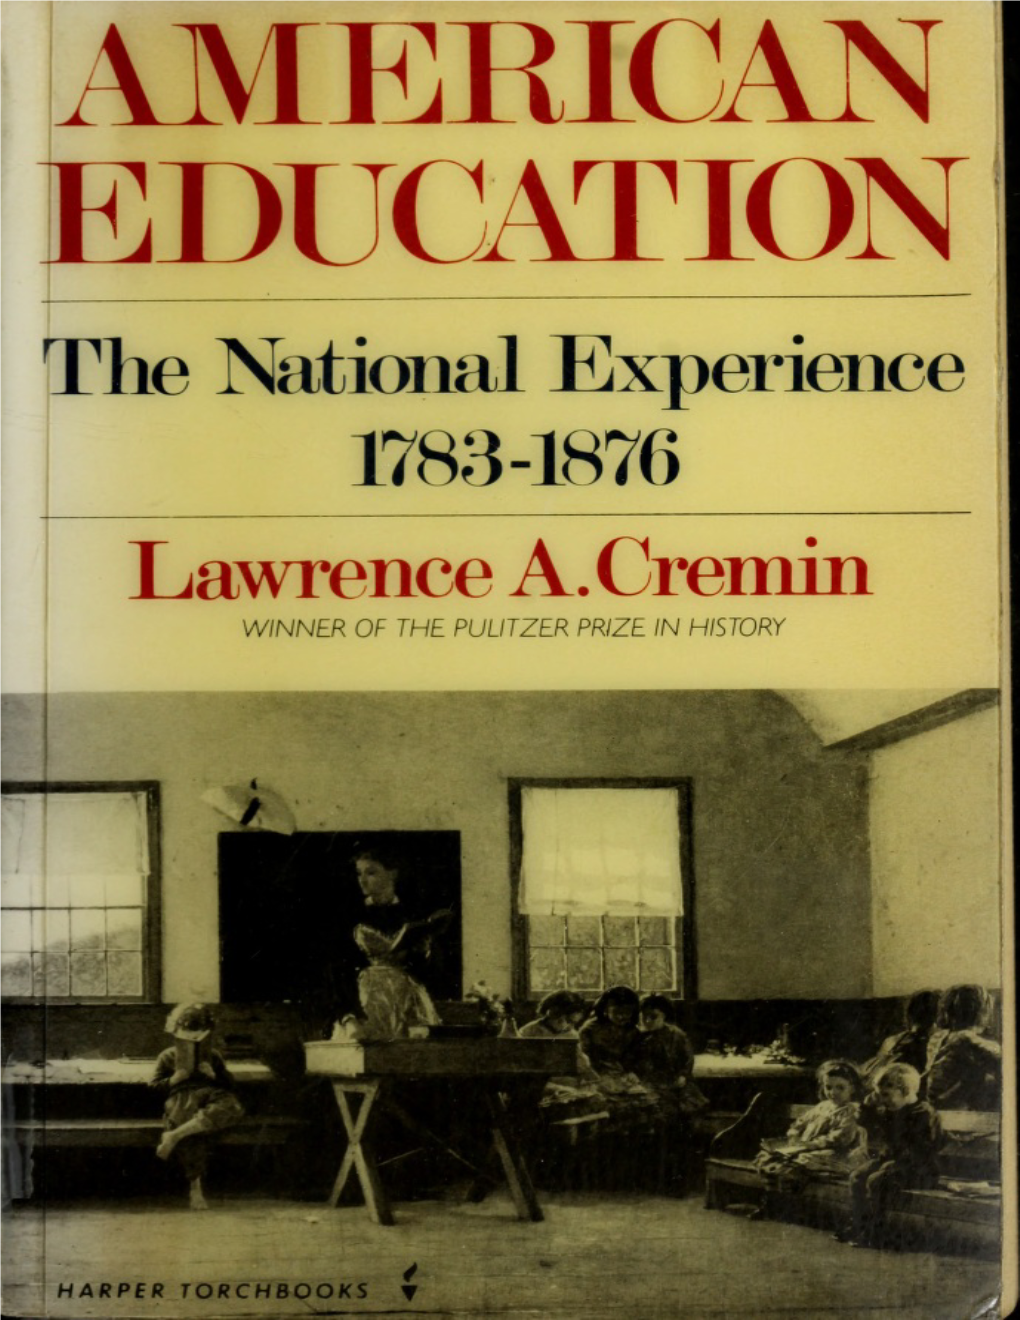 American Education, the National Experience, 1783-1876